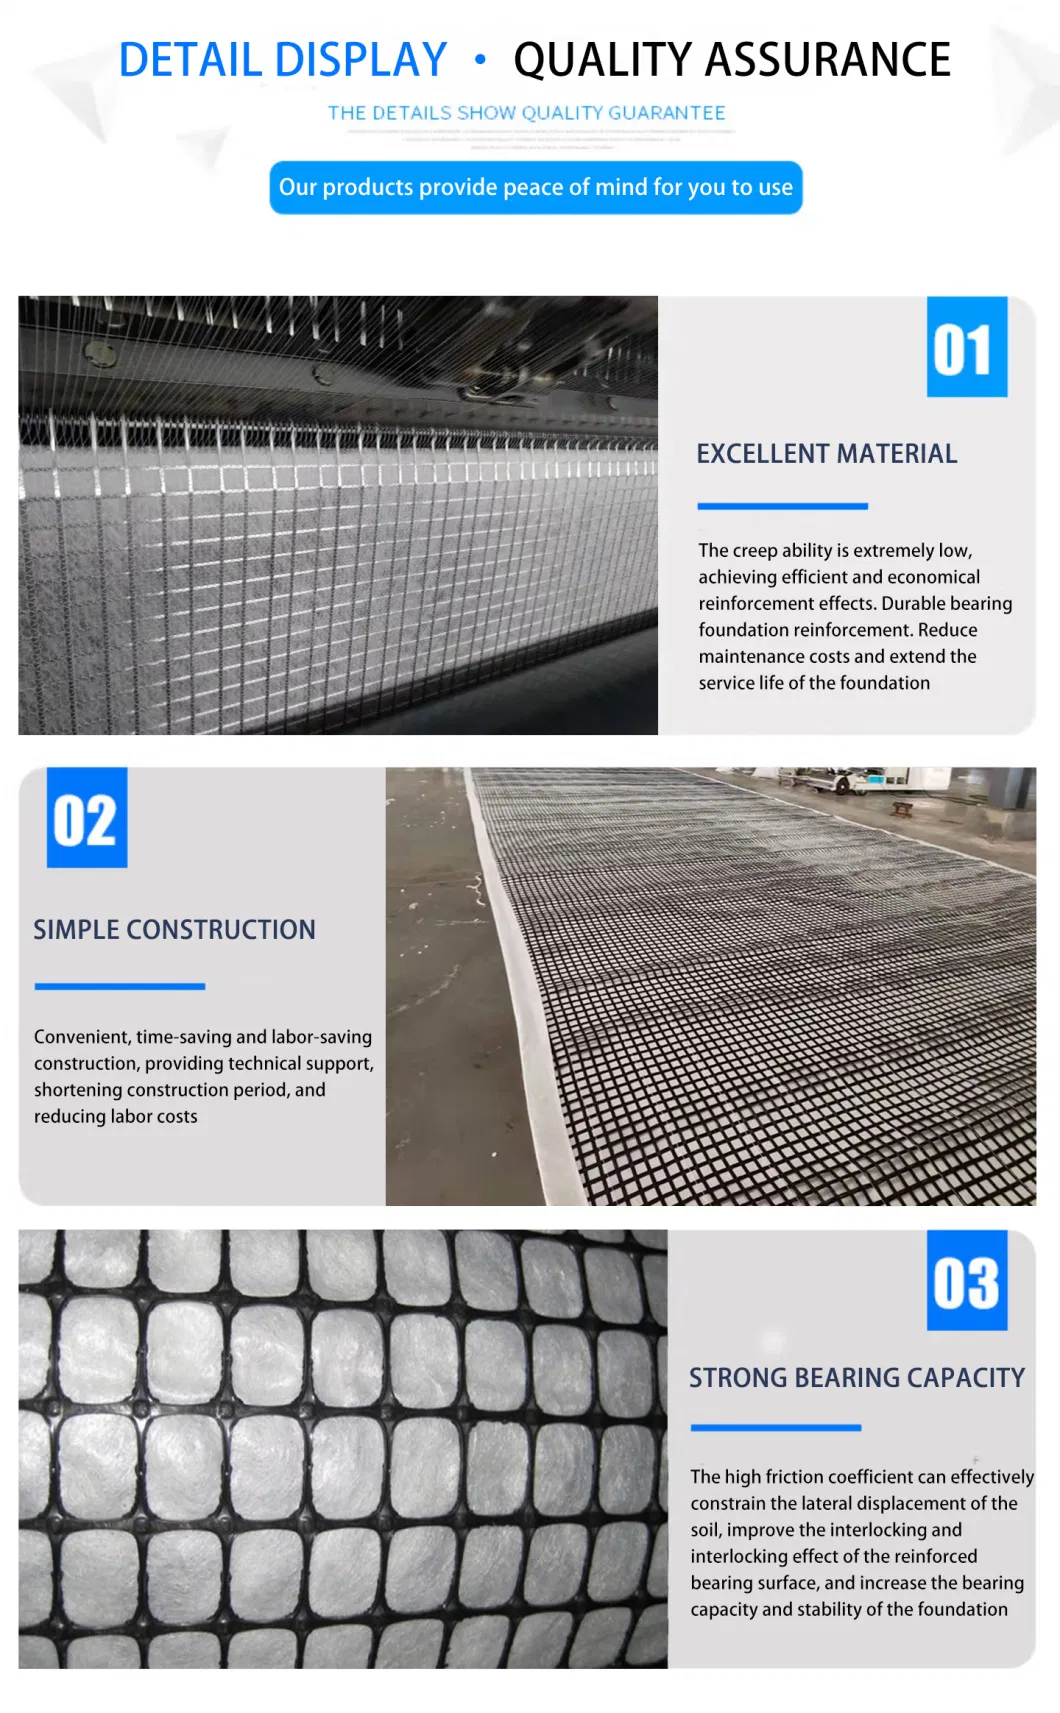 Composite Geogrid Fiberglass Geogrid Self-Adhesive Combigrid Nonwoven Geotextile for Drainage Isolation